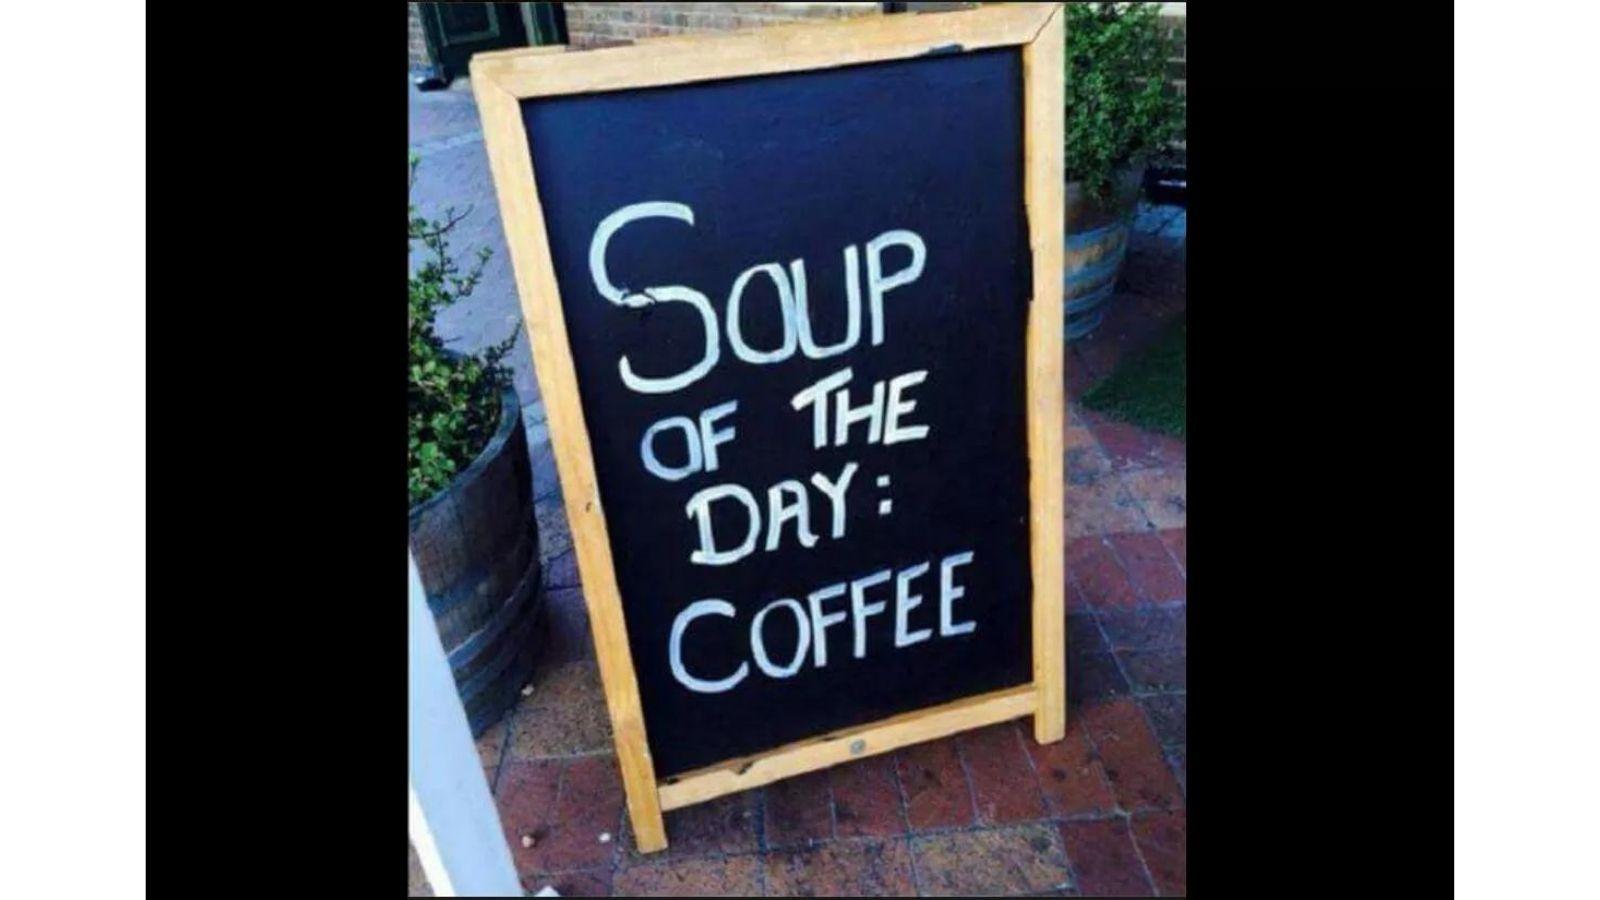 45 Funny Coffee Memes all humor and coffee lovers can not miss - meme 12